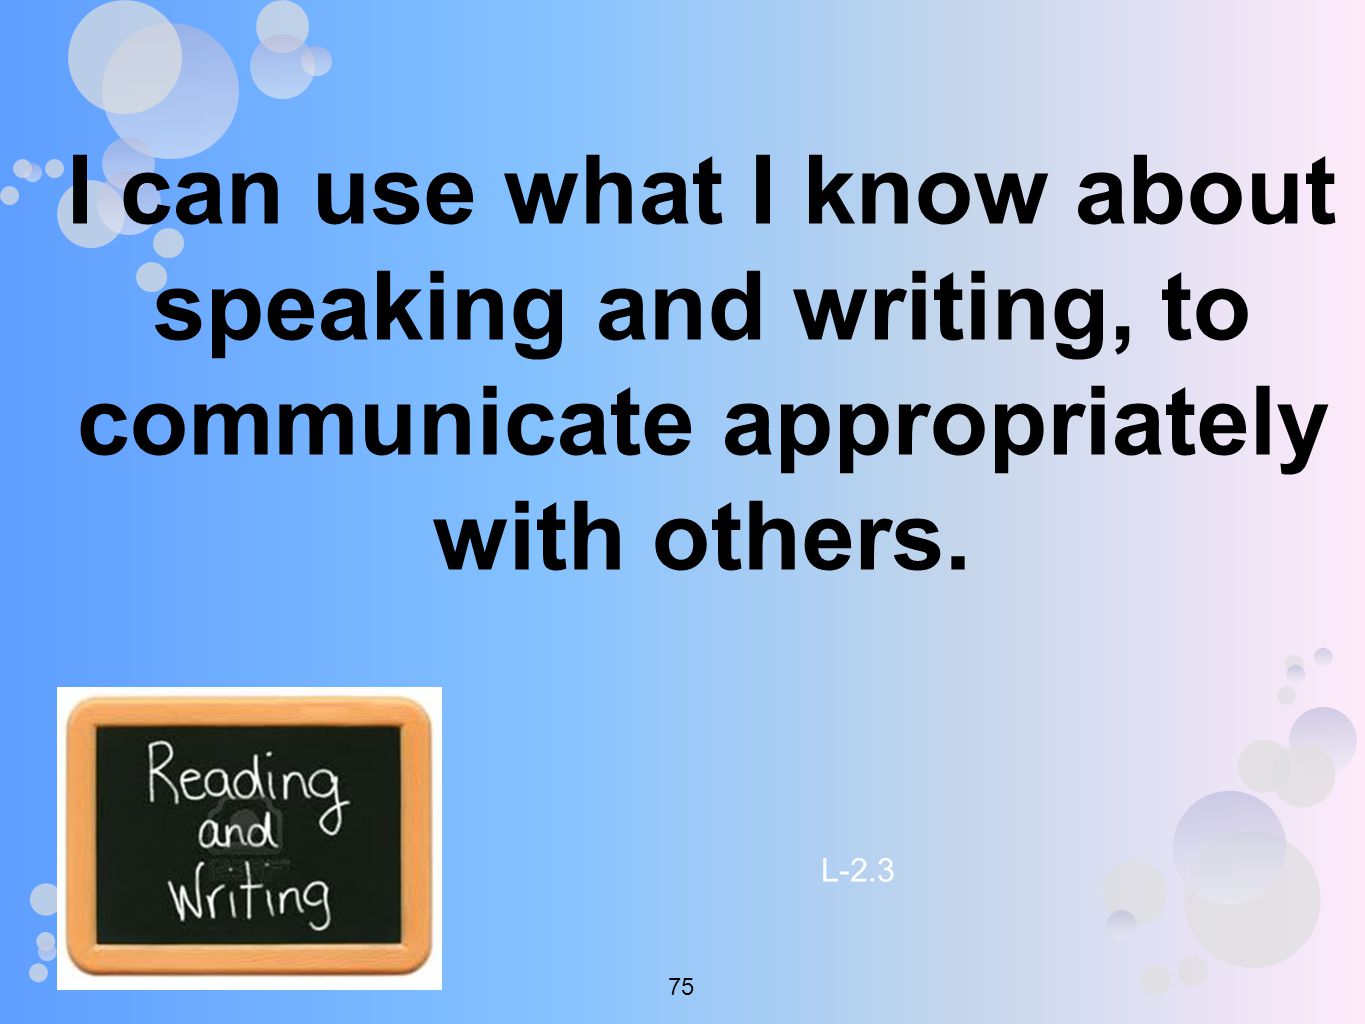 I can use what I know about speaking and writing, to communicate appropriately with others.